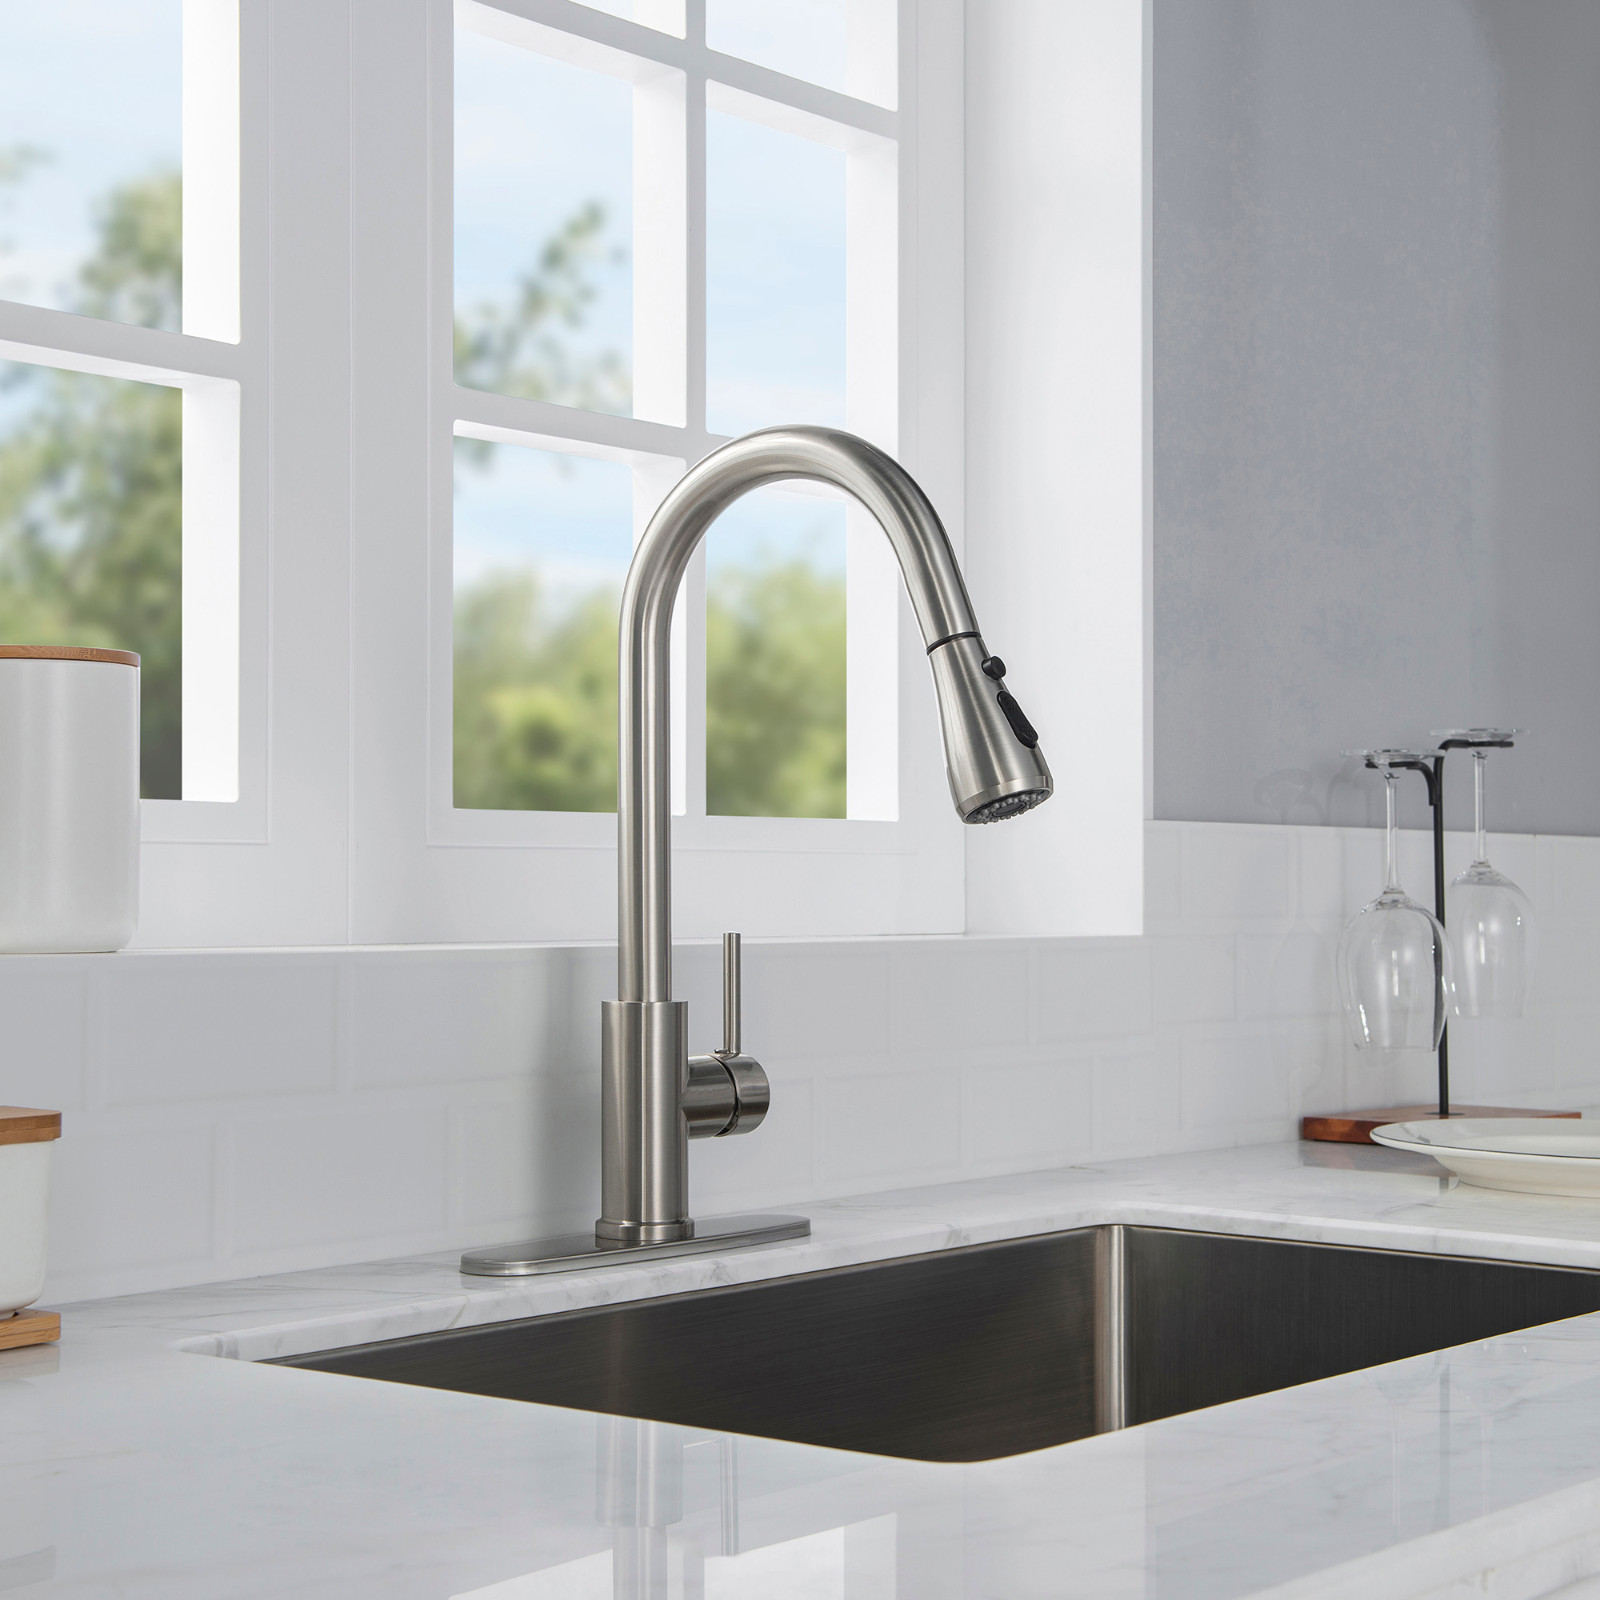  WOODBRIDGE WK090801BN Stainless Steel Single Handle Pull Down Kitchen Faucet in Brushed Nickel Finish._9388